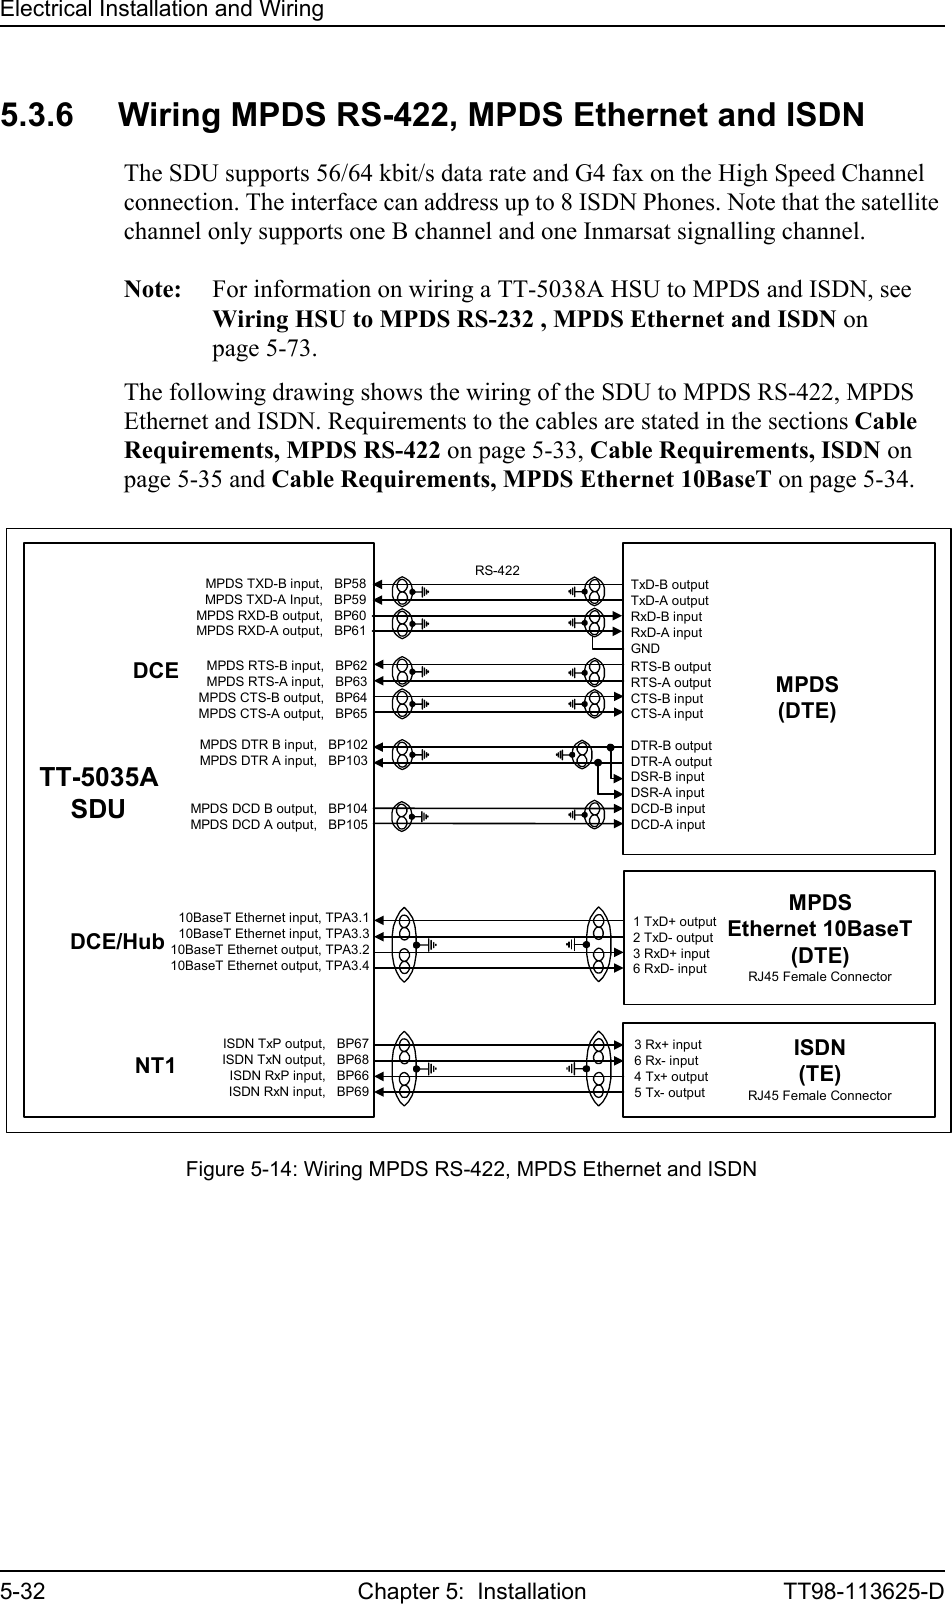 Electrical Installation and Wiring5-32 Chapter 5:  Installation TT98-113625-D5.3.6 Wiring MPDS RS-422, MPDS Ethernet and ISDNThe SDU supports 56/64 kbit/s data rate and G4 fax on the High Speed Channel connection. The interface can address up to 8 ISDN Phones. Note that the satellite channel only supports one B channel and one Inmarsat signalling channel.Note: For information on wiring a TT-5038A HSU to MPDS and ISDN, see Wiring HSU to MPDS RS-232 , MPDS Ethernet and ISDN on page 5-73.The following drawing shows the wiring of the SDU to MPDS RS-422, MPDS Ethernet and ISDN. Requirements to the cables are stated in the sections Cable Requirements, MPDS RS-422 on page 5-33, Cable Requirements, ISDN on page 5-35 and Cable Requirements, MPDS Ethernet 10BaseT on page 5-34.Figure 5-14: Wiring MPDS RS-422, MPDS Ethernet and ISDNMPDS(DTE)ISDN(TE)RJ45 Female ConnectorISDN TxP output,   BP67ISDN TxN output,   BP68ISDN RxP input,   BP66ISDN RxN input,   BP69MPDSEthernet 10BaseT(DTE)RJ45 Female Connector MPDS DTR B input,   BP102MPDS DTR A input,   BP103MPDS DCD B output,   BP104MPDS DCD A output,   BP105RS-422MPDS TXD-B input,   BP58MPDS TXD-A Input,   BP59 MPDS RXD-B output,   BP60 MPDS RXD-A output,   BP61 MPDS RTS-B input,   BP62 MPDS RTS-A input,   BP63 MPDS CTS-B output,   BP64 MPDS CTS-A output,   BP65TT-5035ASDU10BaseT Ethernet input, TPA3.110BaseT Ethernet input, TPA3.310BaseT Ethernet output, TPA3.210BaseT Ethernet output, TPA3.41 TxD+ output2 TxD- output3 RxD+ input6 RxD- inputTxD-B outputTxD-A outputRxD-B inputRxD-A inputGNDRTS-B outputRTS-A outputCTS-B inputCTS-A inputDTR-B outputDTR-A outputDSR-B inputDSR-A inputDCD-B inputDCD-A input3 Rx+ input6 Rx- input4 Tx+ output5 Tx- outputDCENT1DCE/Hub